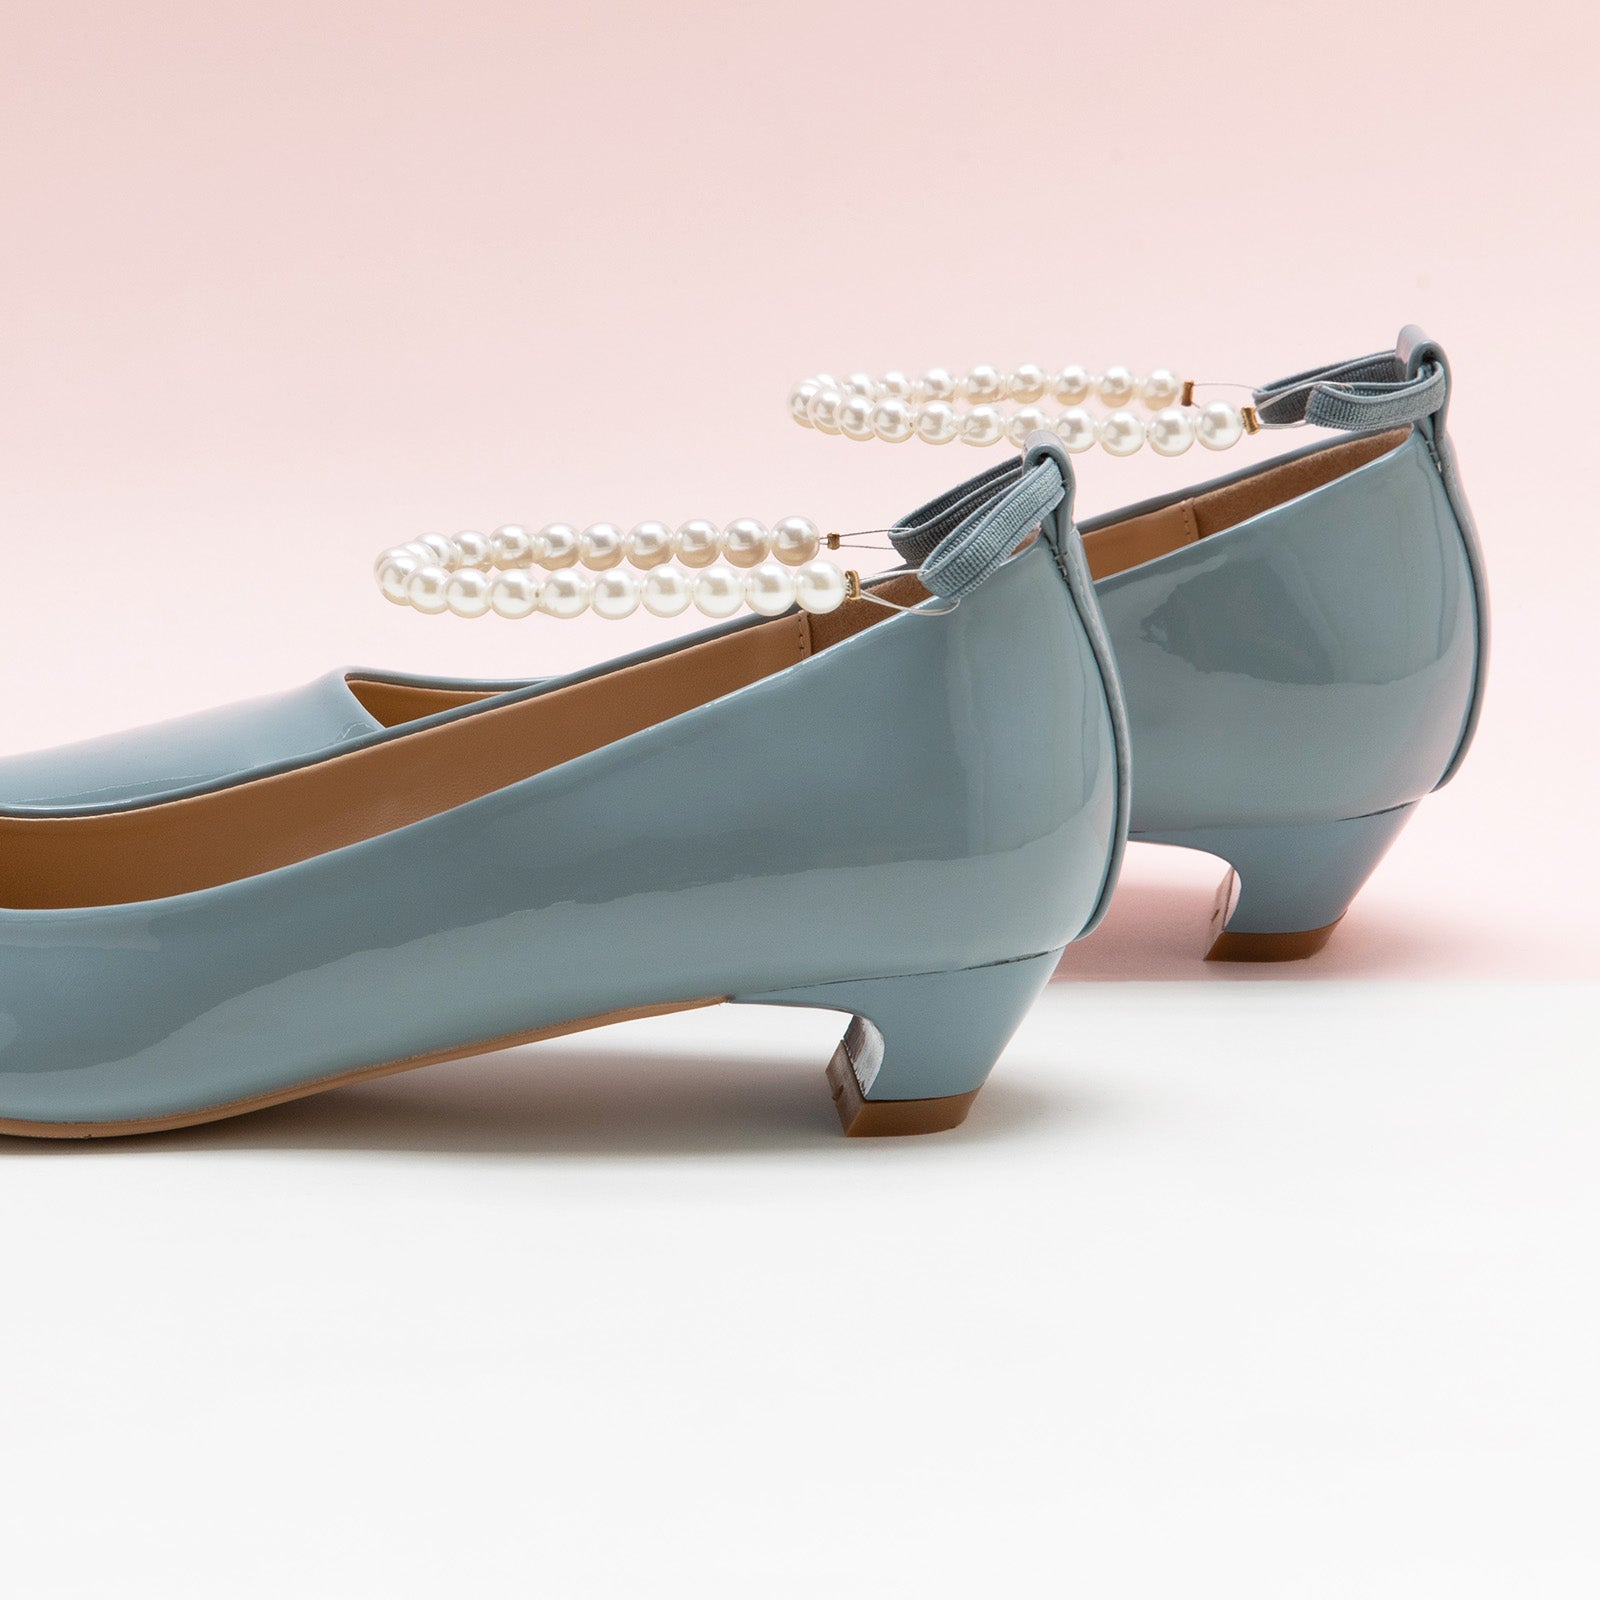 Pearl Straps Low Heel in Sky, featuring delicate pearl details for a soft and sophisticated style